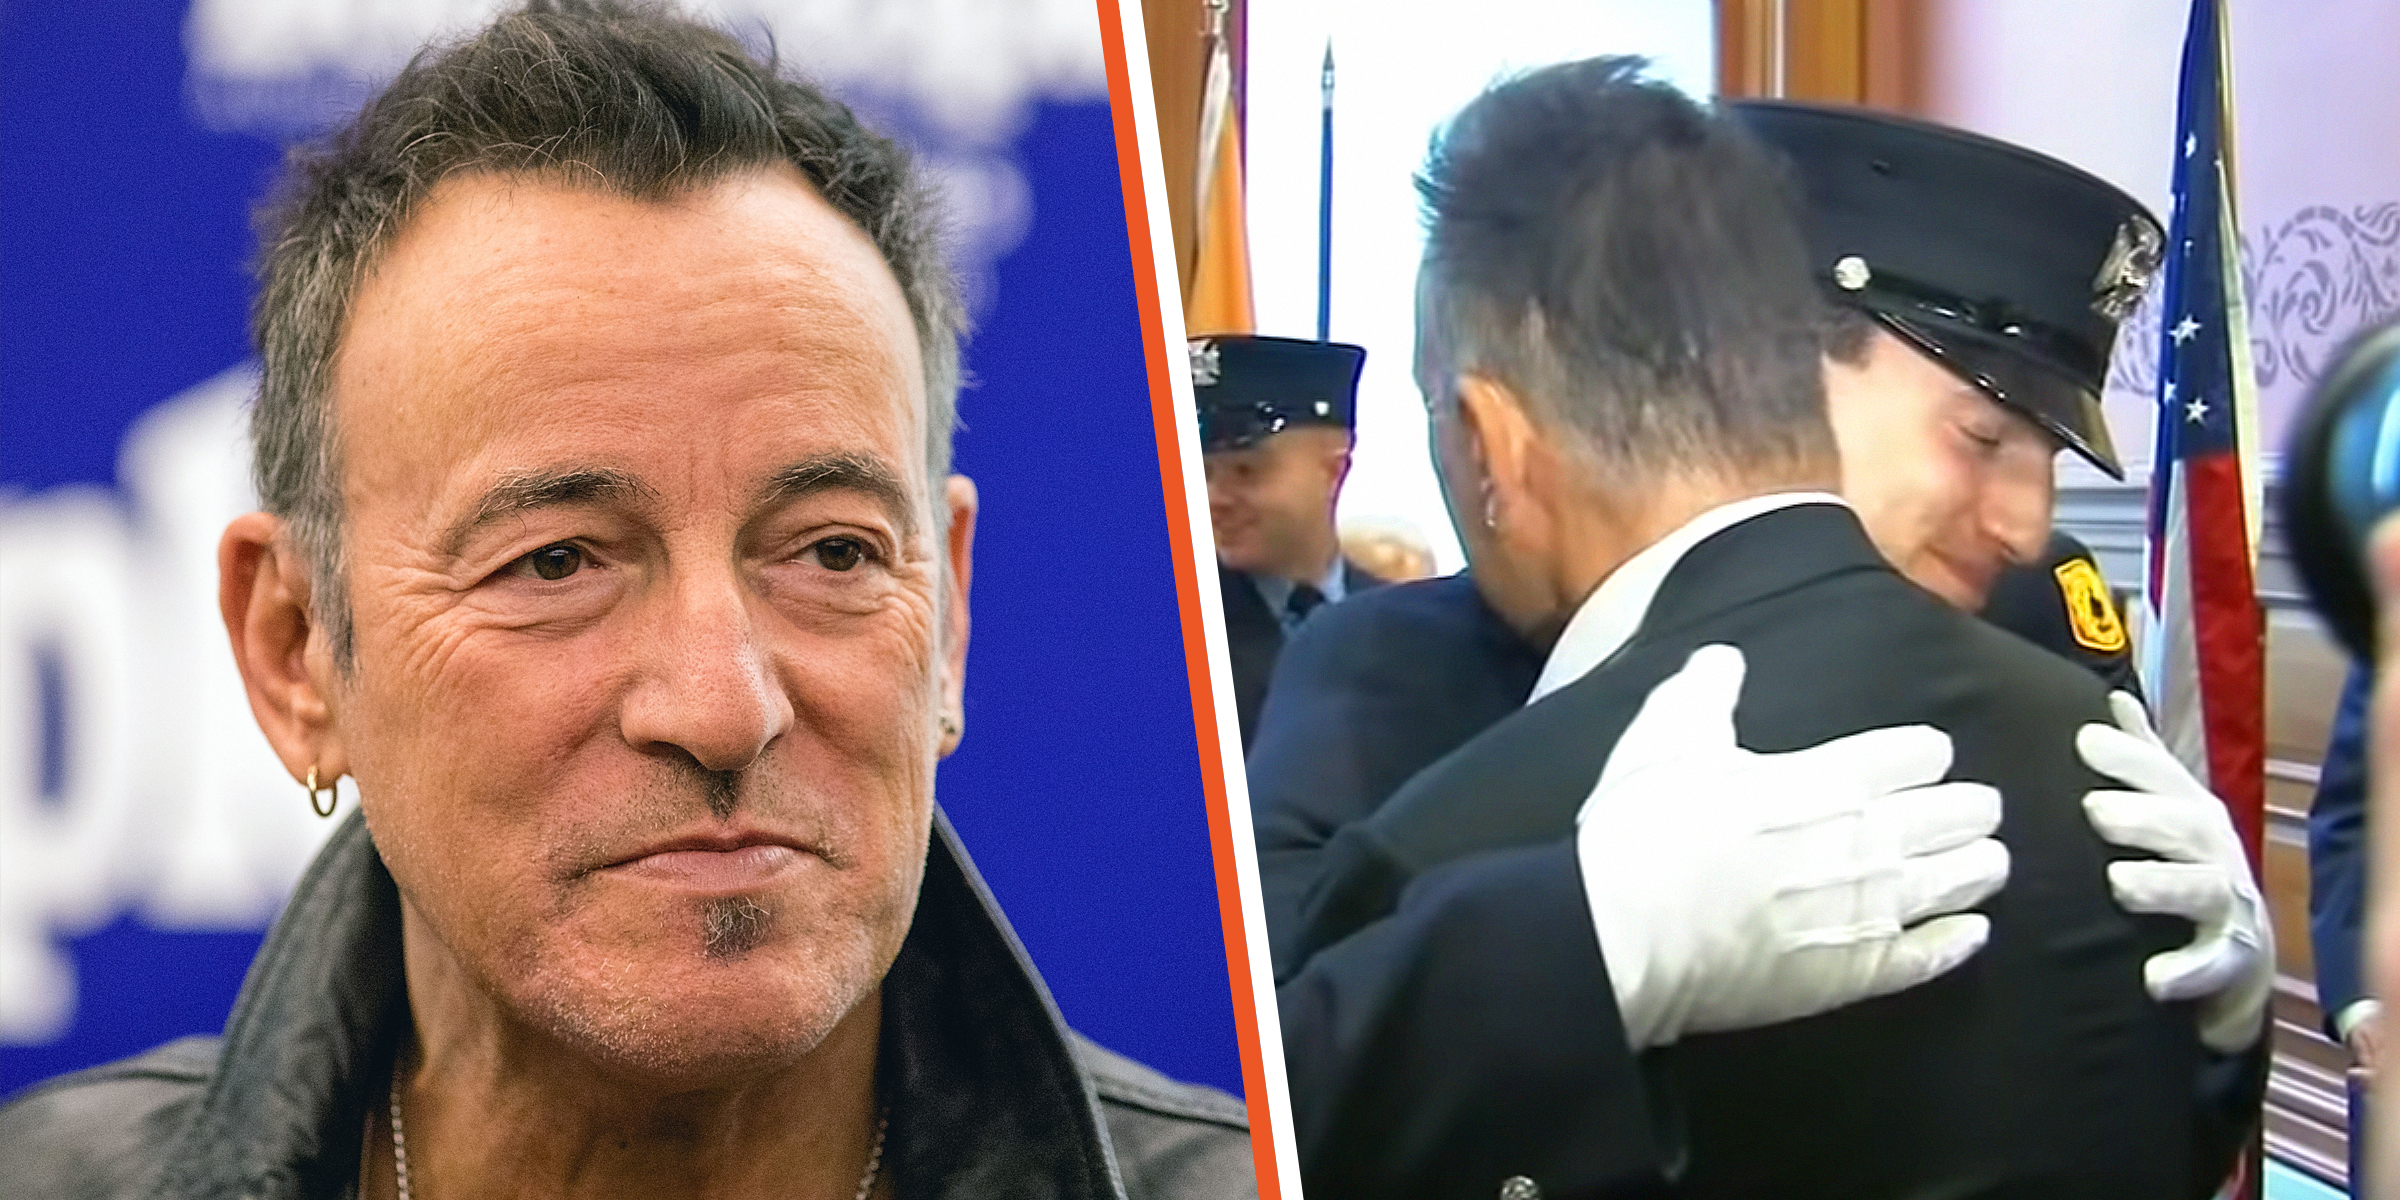 Bruce Springsteen | Bruce Springsteen et Sam Ryan | Source : Getty Images youtube.com/Eyewitness News ABC7NY